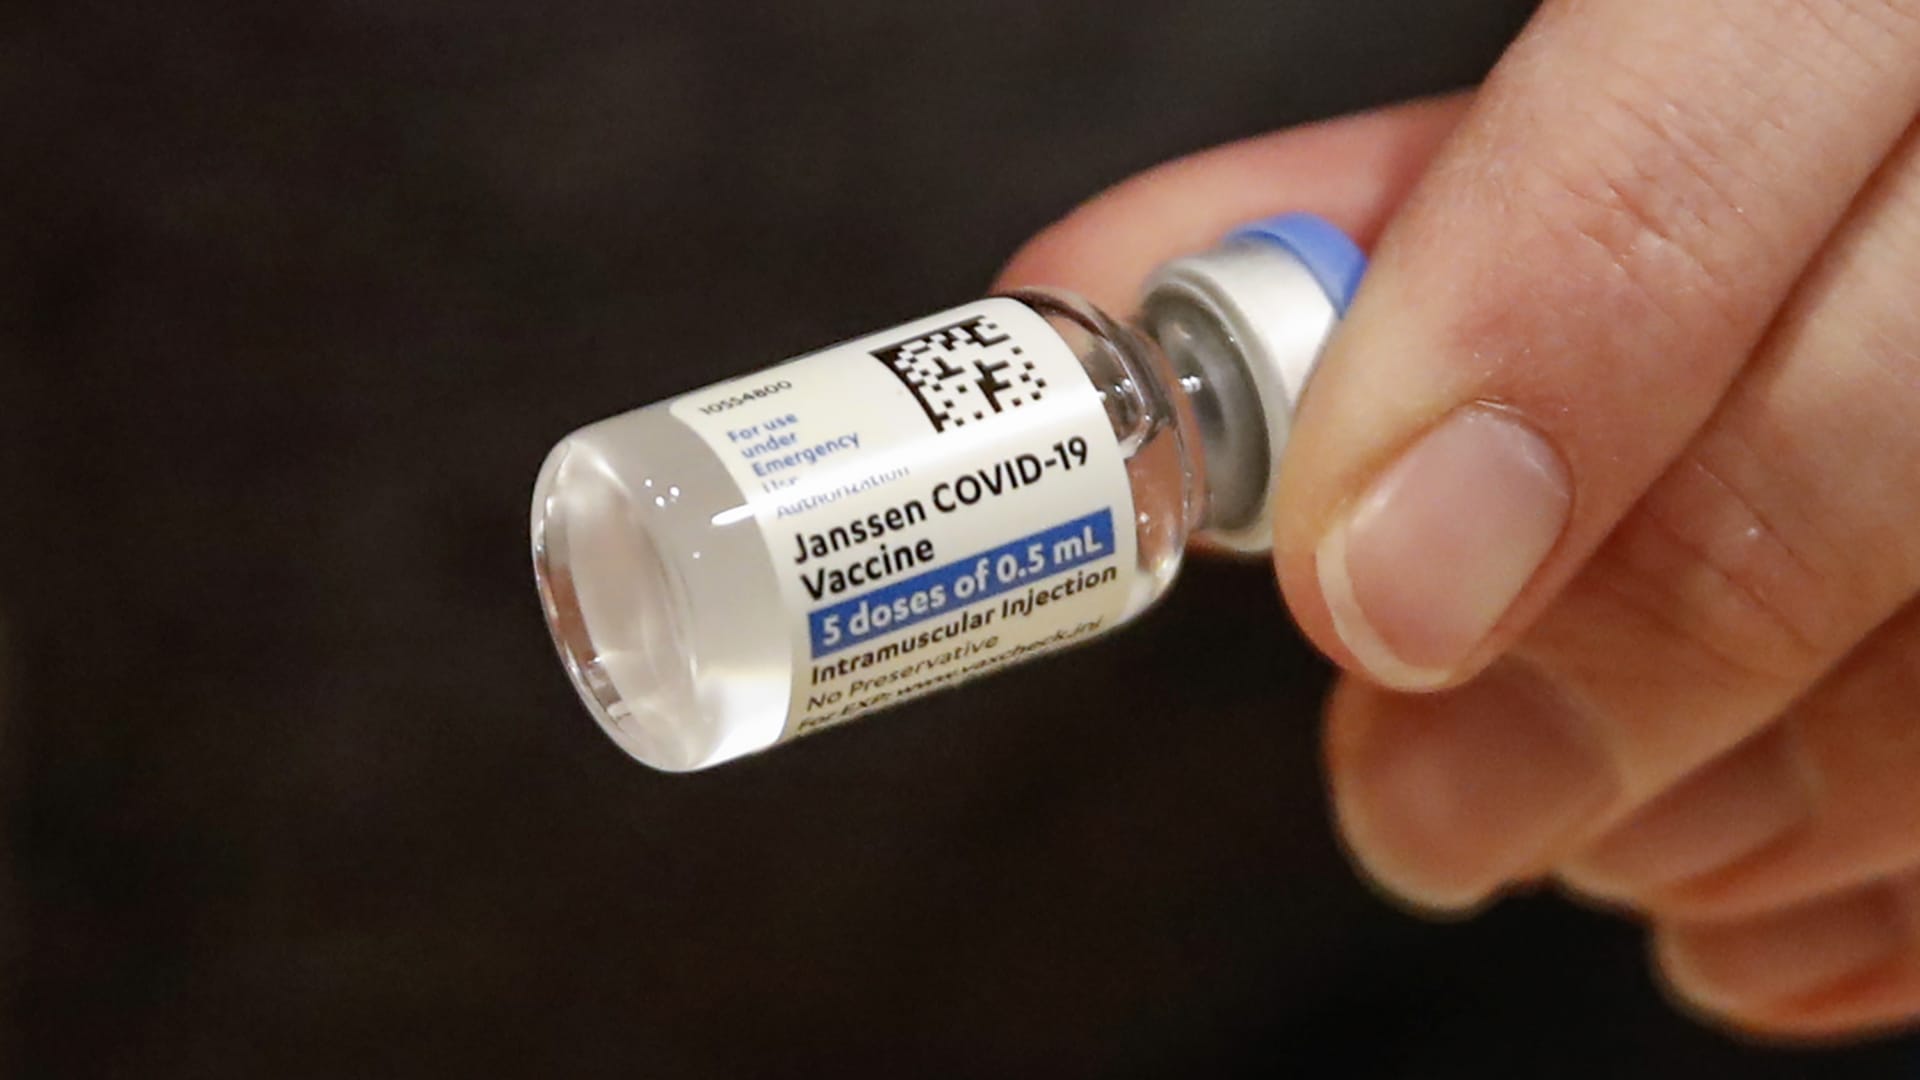 Johnson & Johnson Covid-19 vaccine at a vaccination center established at the Hilton Chicago O'Hare Airport Hotel in Chicago, Illinois, on March 5, 2021.